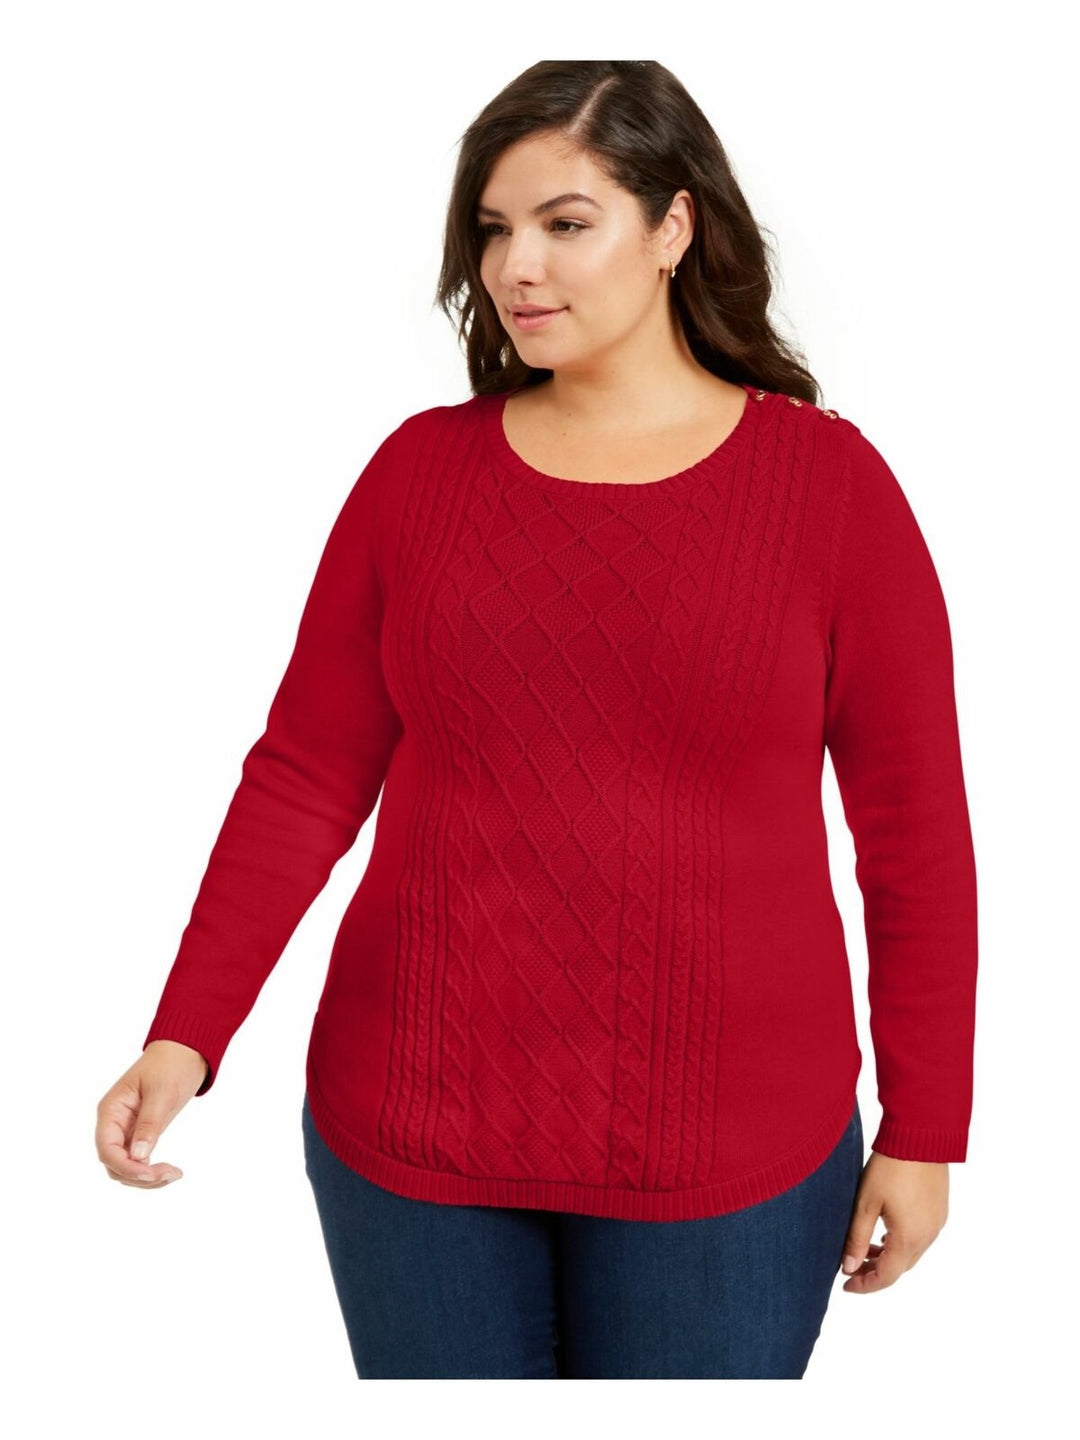 Charter Club Women's Plus Size Cable-Knit Sweater Red Size Extra Large